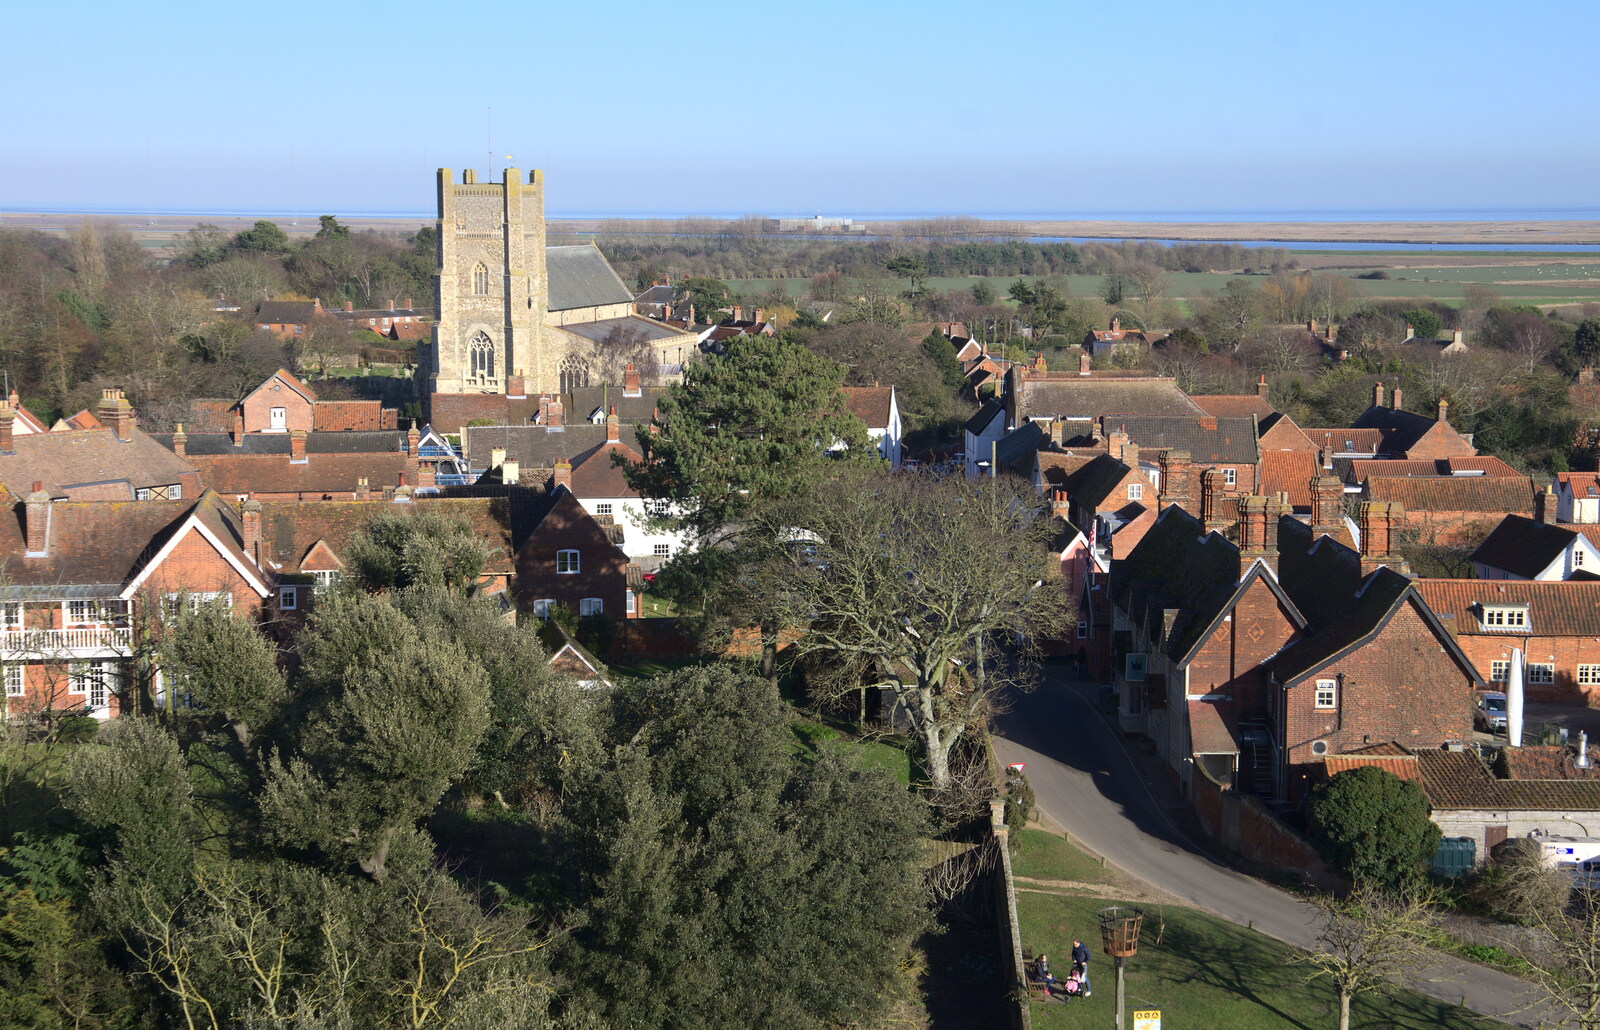 More of the town of Orford from An Orford Day Out, Orford, Suffolk - 17th February 2018